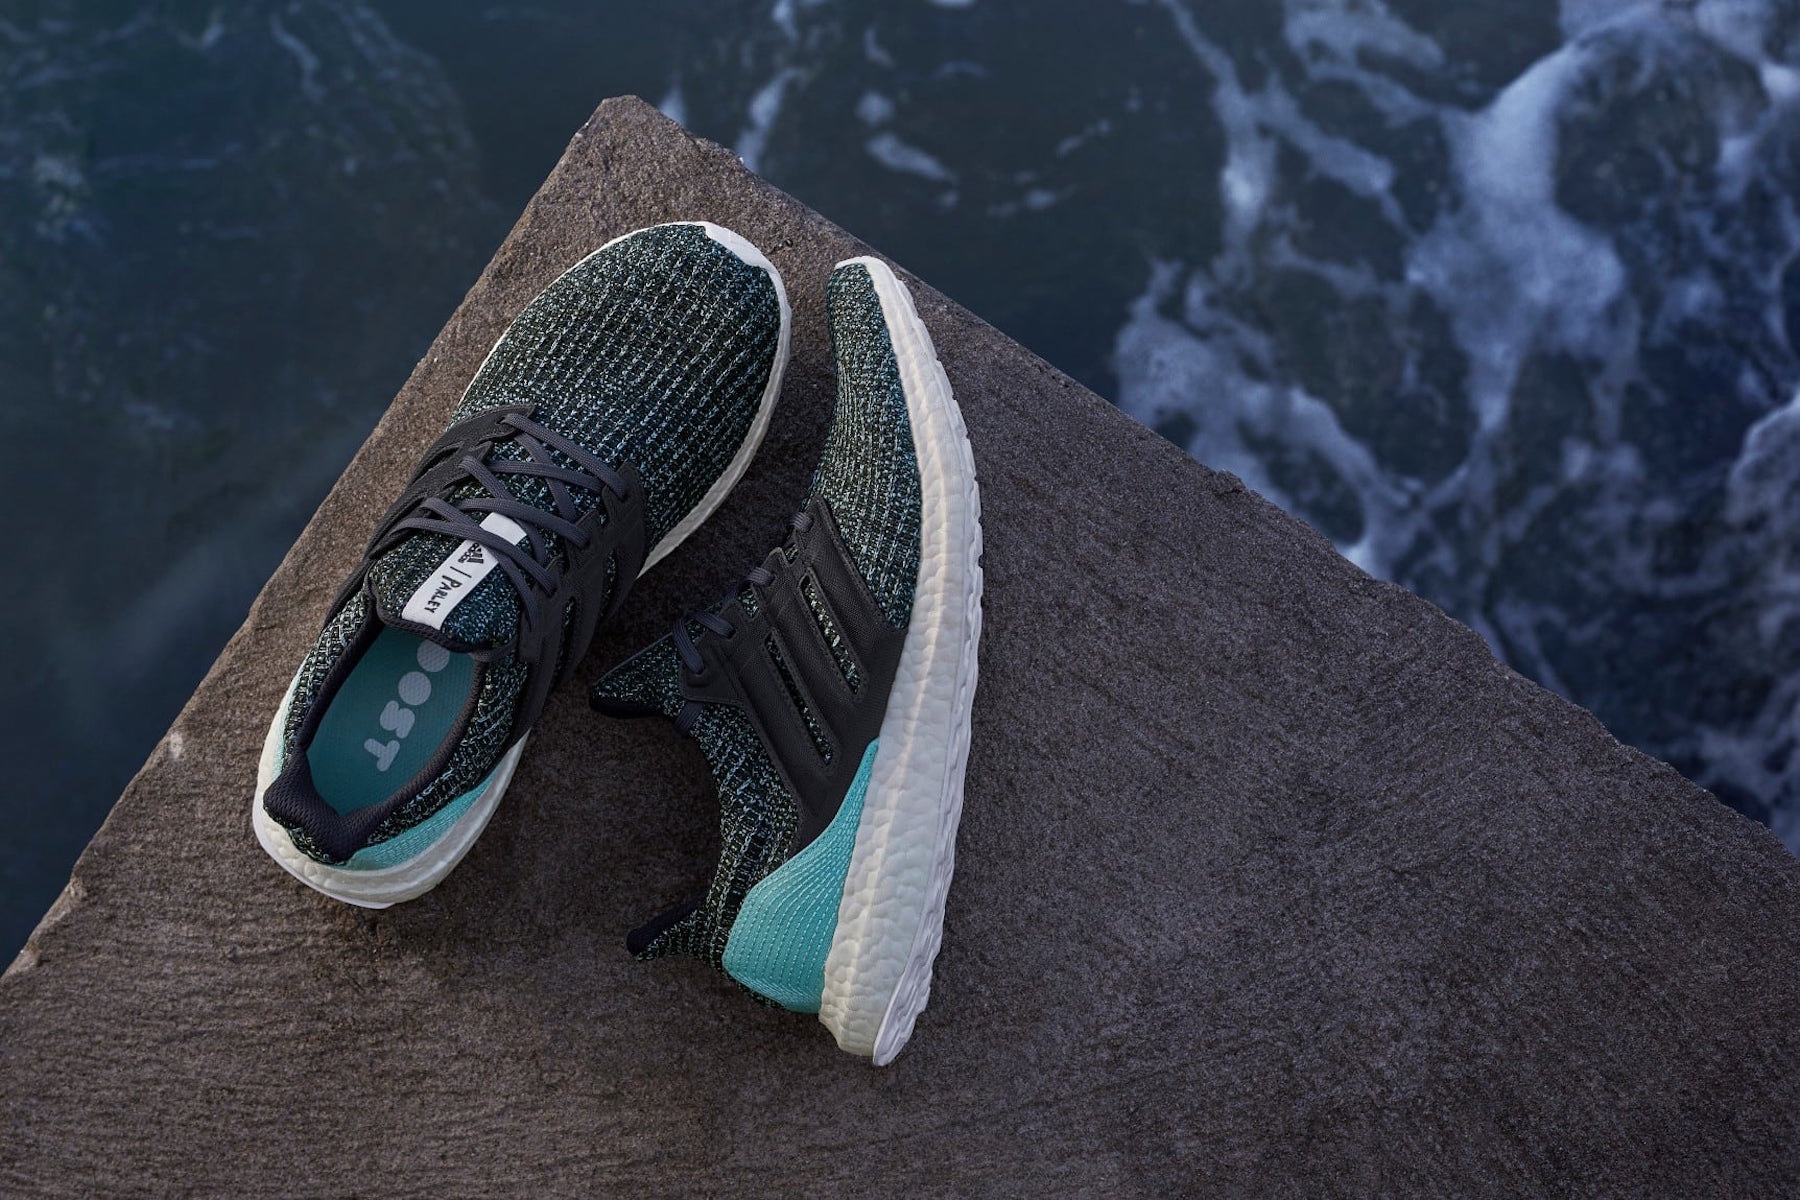 Parley for the Oceans x adidas 全新聯乘 UltraBOOST 系列正式發布